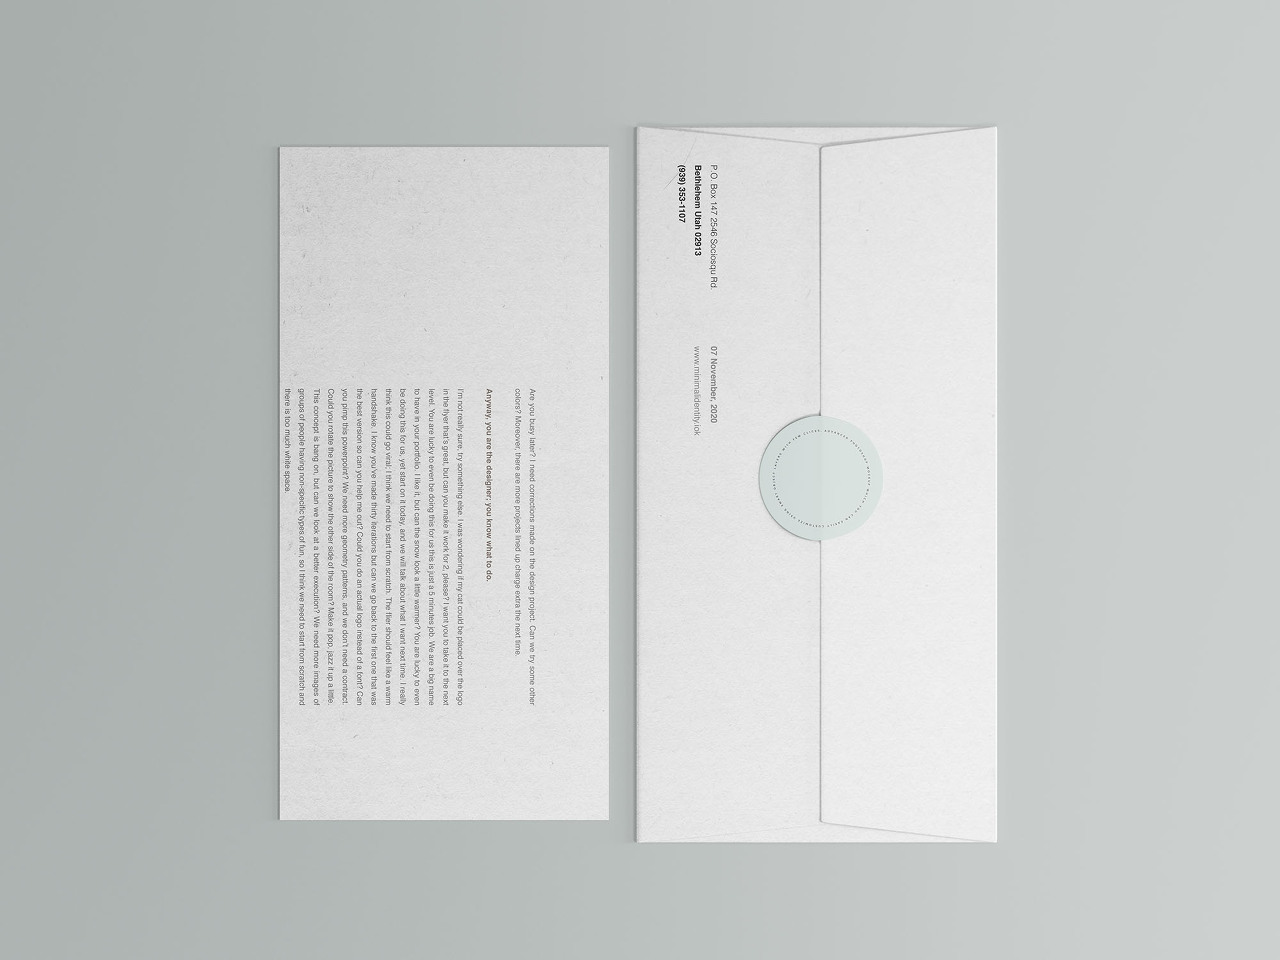 Corporate Envelope and Letter Mockup(회사 봉투 및 편지 목업)